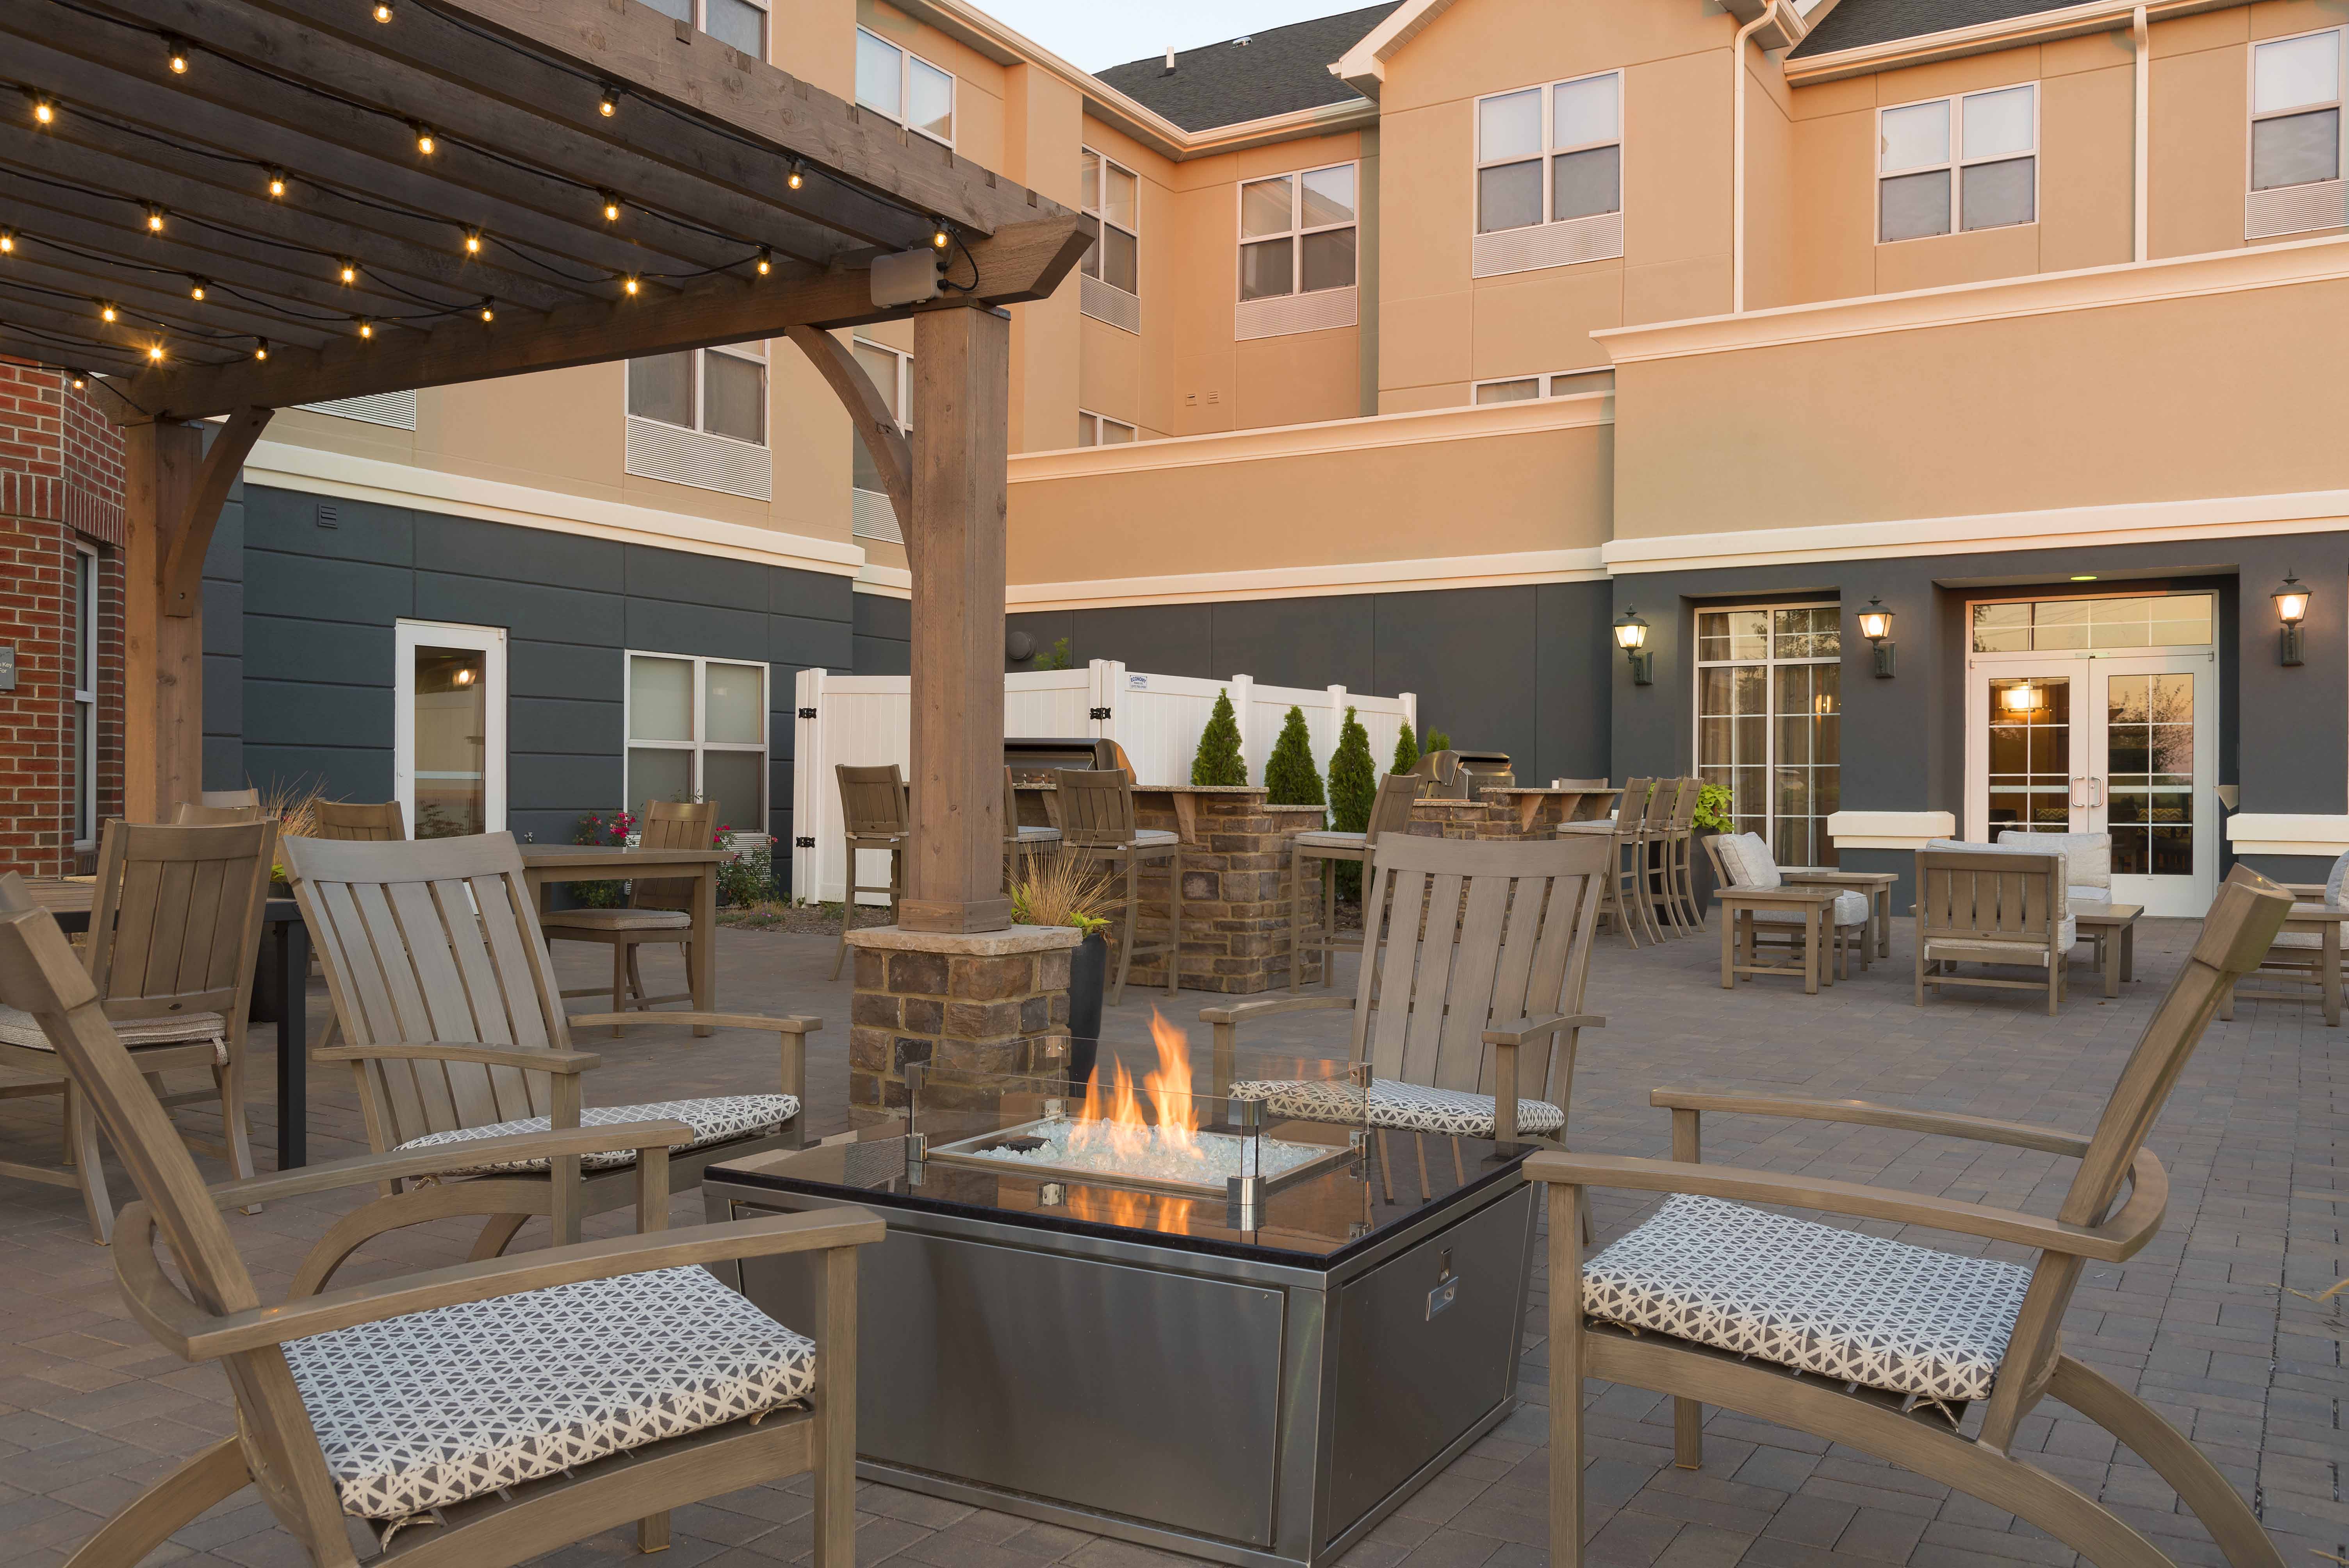 Courtyard Firepit and Seating, Night